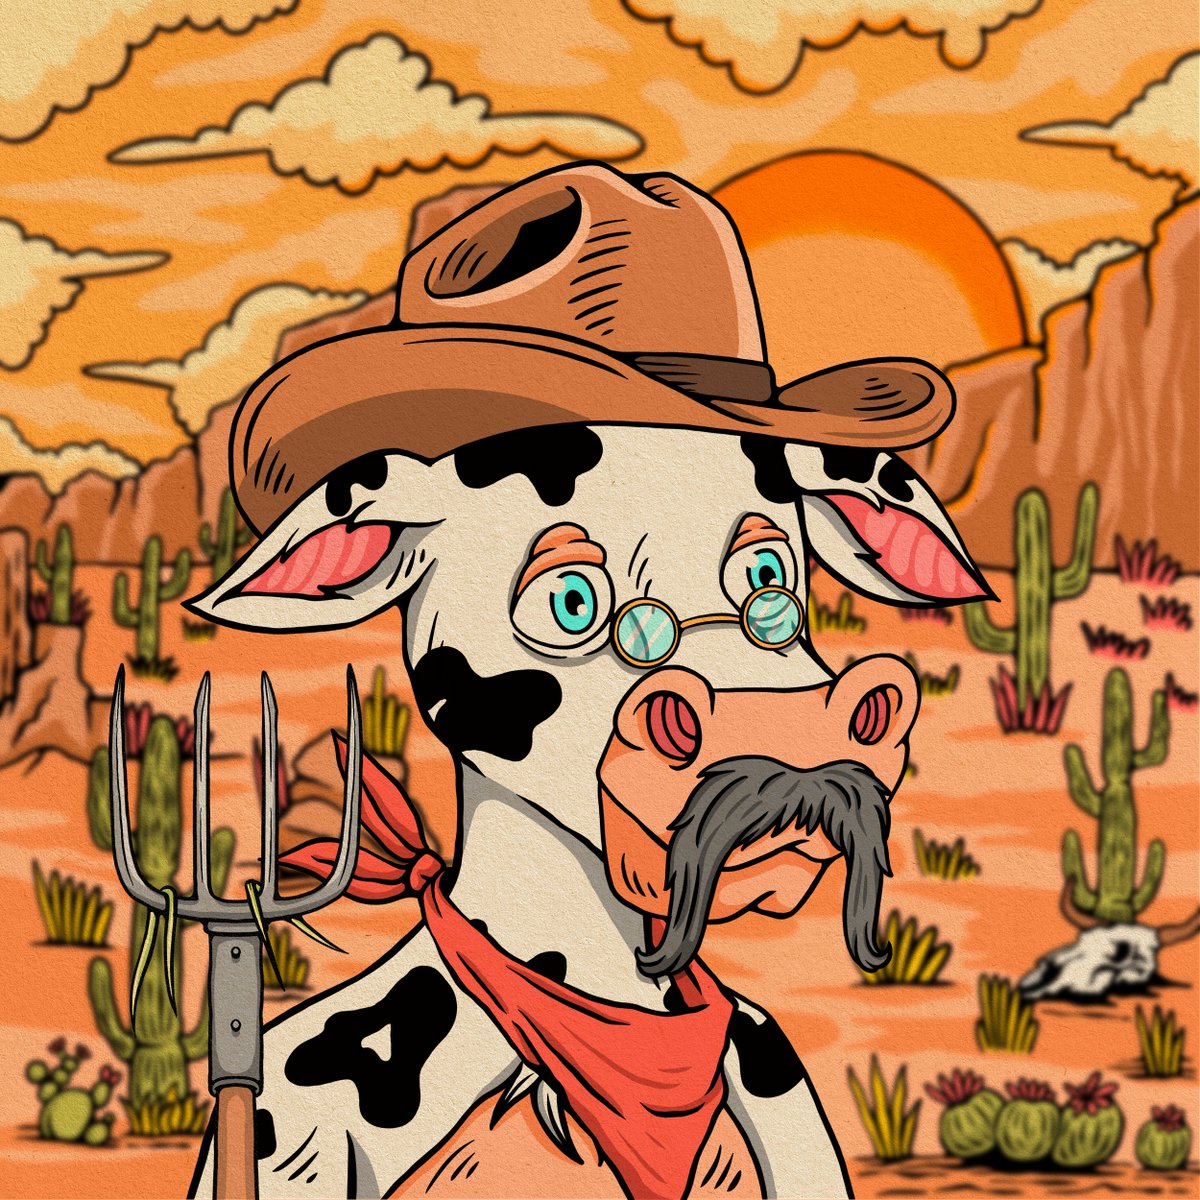 There's a new sheriff in town!🐮 The first 1500 to interact and follow will be considered for whitelist. #Solana #SolanaNFT #NFTGiveaway #NFTCommunity